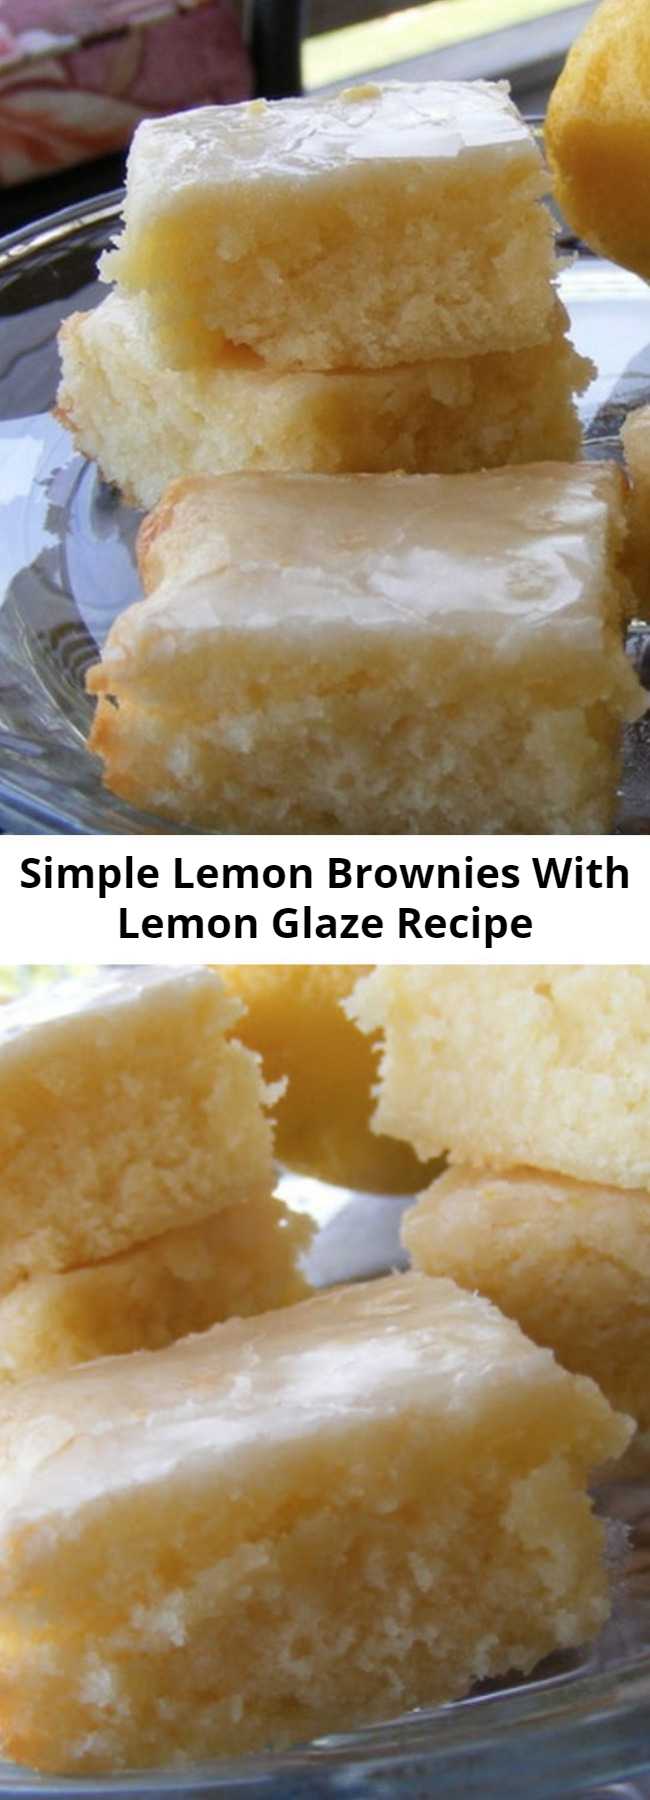 Simple Lemon Brownies With Lemon Glaze Recipe - Delicious and EASY to make Lemon Brownies with a sweet Lemon Glaze frosting that's so good you won't eat just one! Make these in minutes for your family!